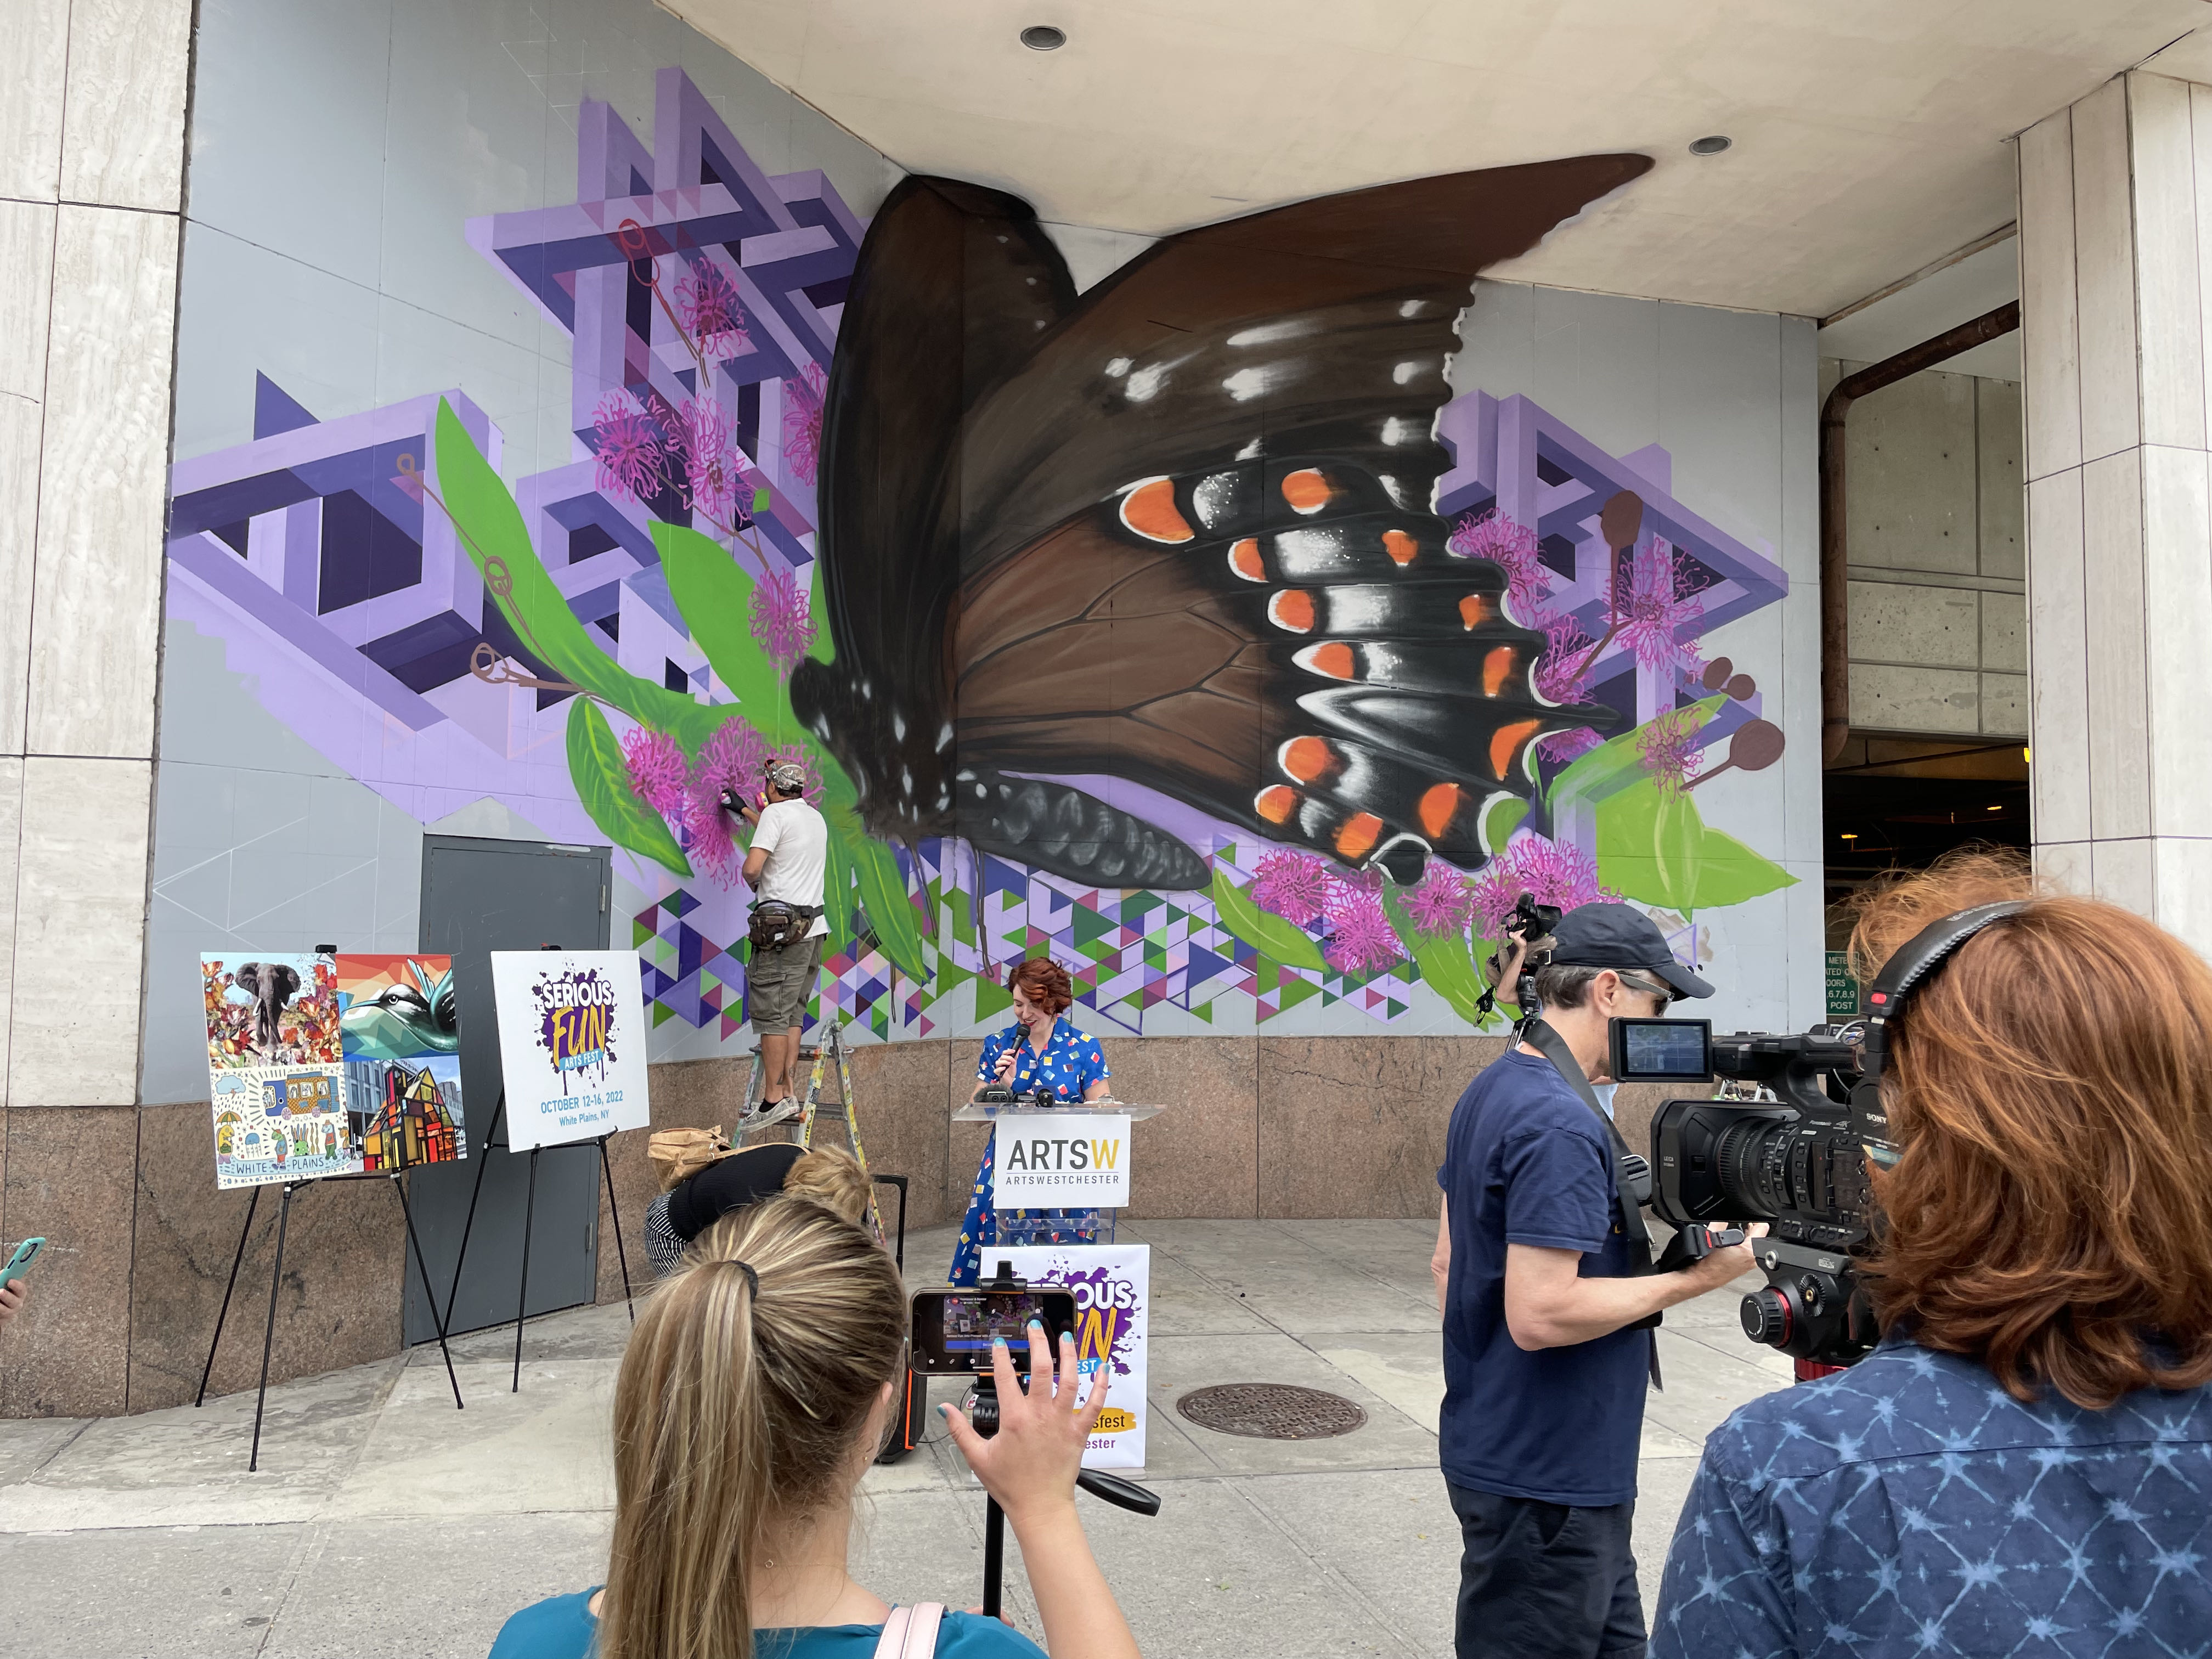 Thomas Roach on Twitter: "We celebrated the installation of a new mural on the St side of the Galleria yesterday, part of the lead up to @ArtsWestchester Serious Fun Festival, coming